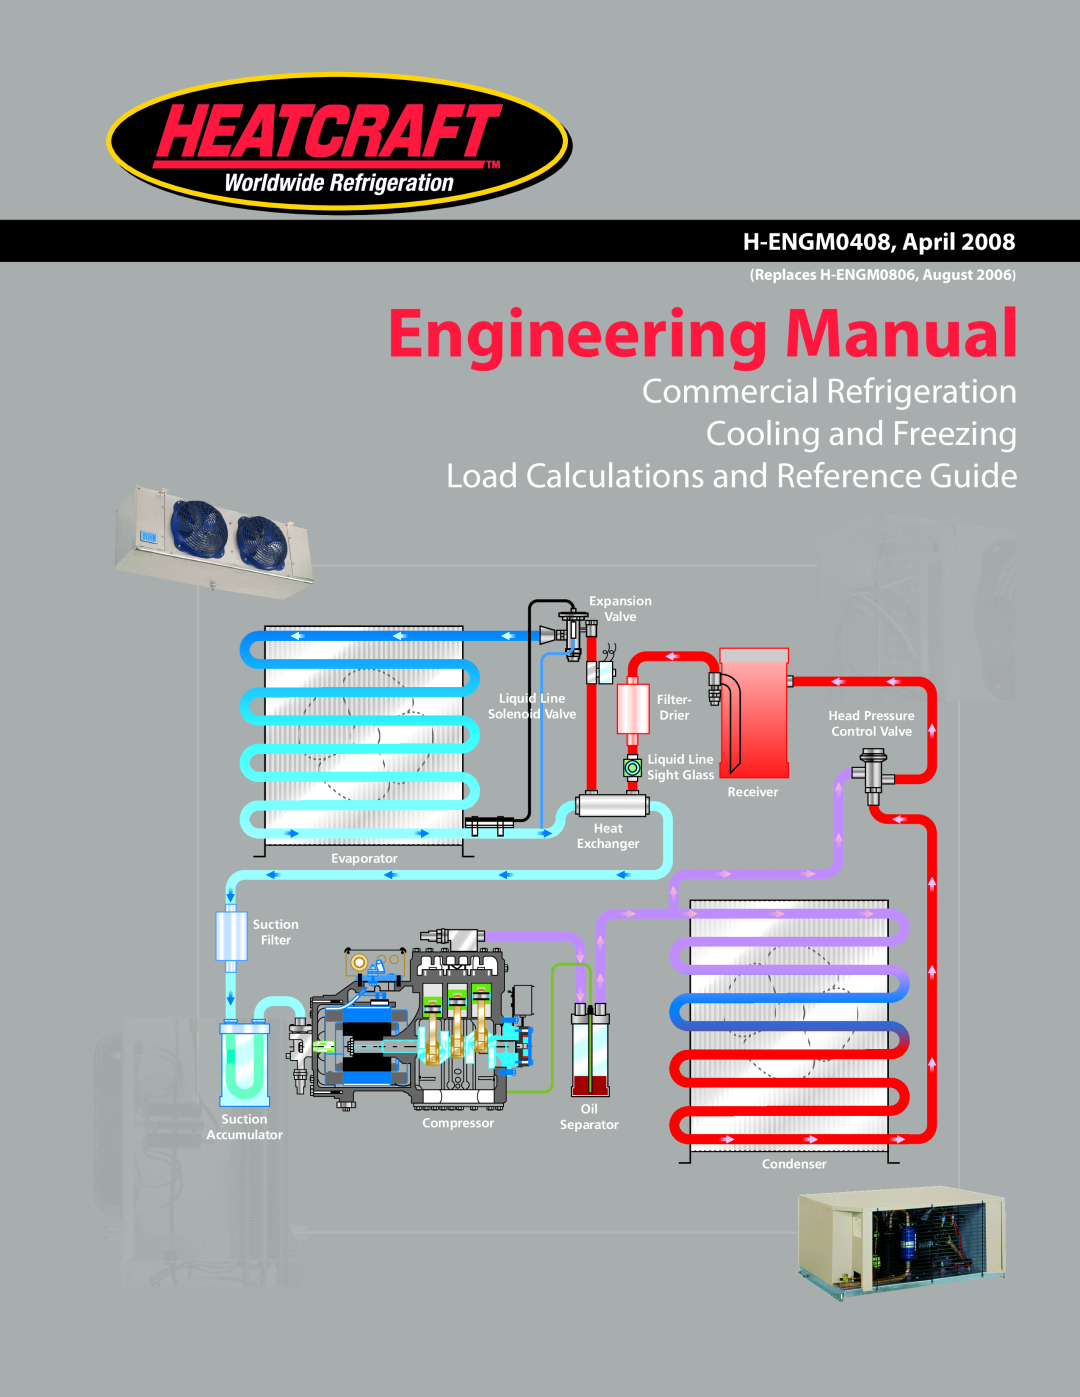 Heatcraft Refrigeration Products H-ENGM0408 manual Engineering Manual, Commercial Refrigeration Cooling and Freezing 